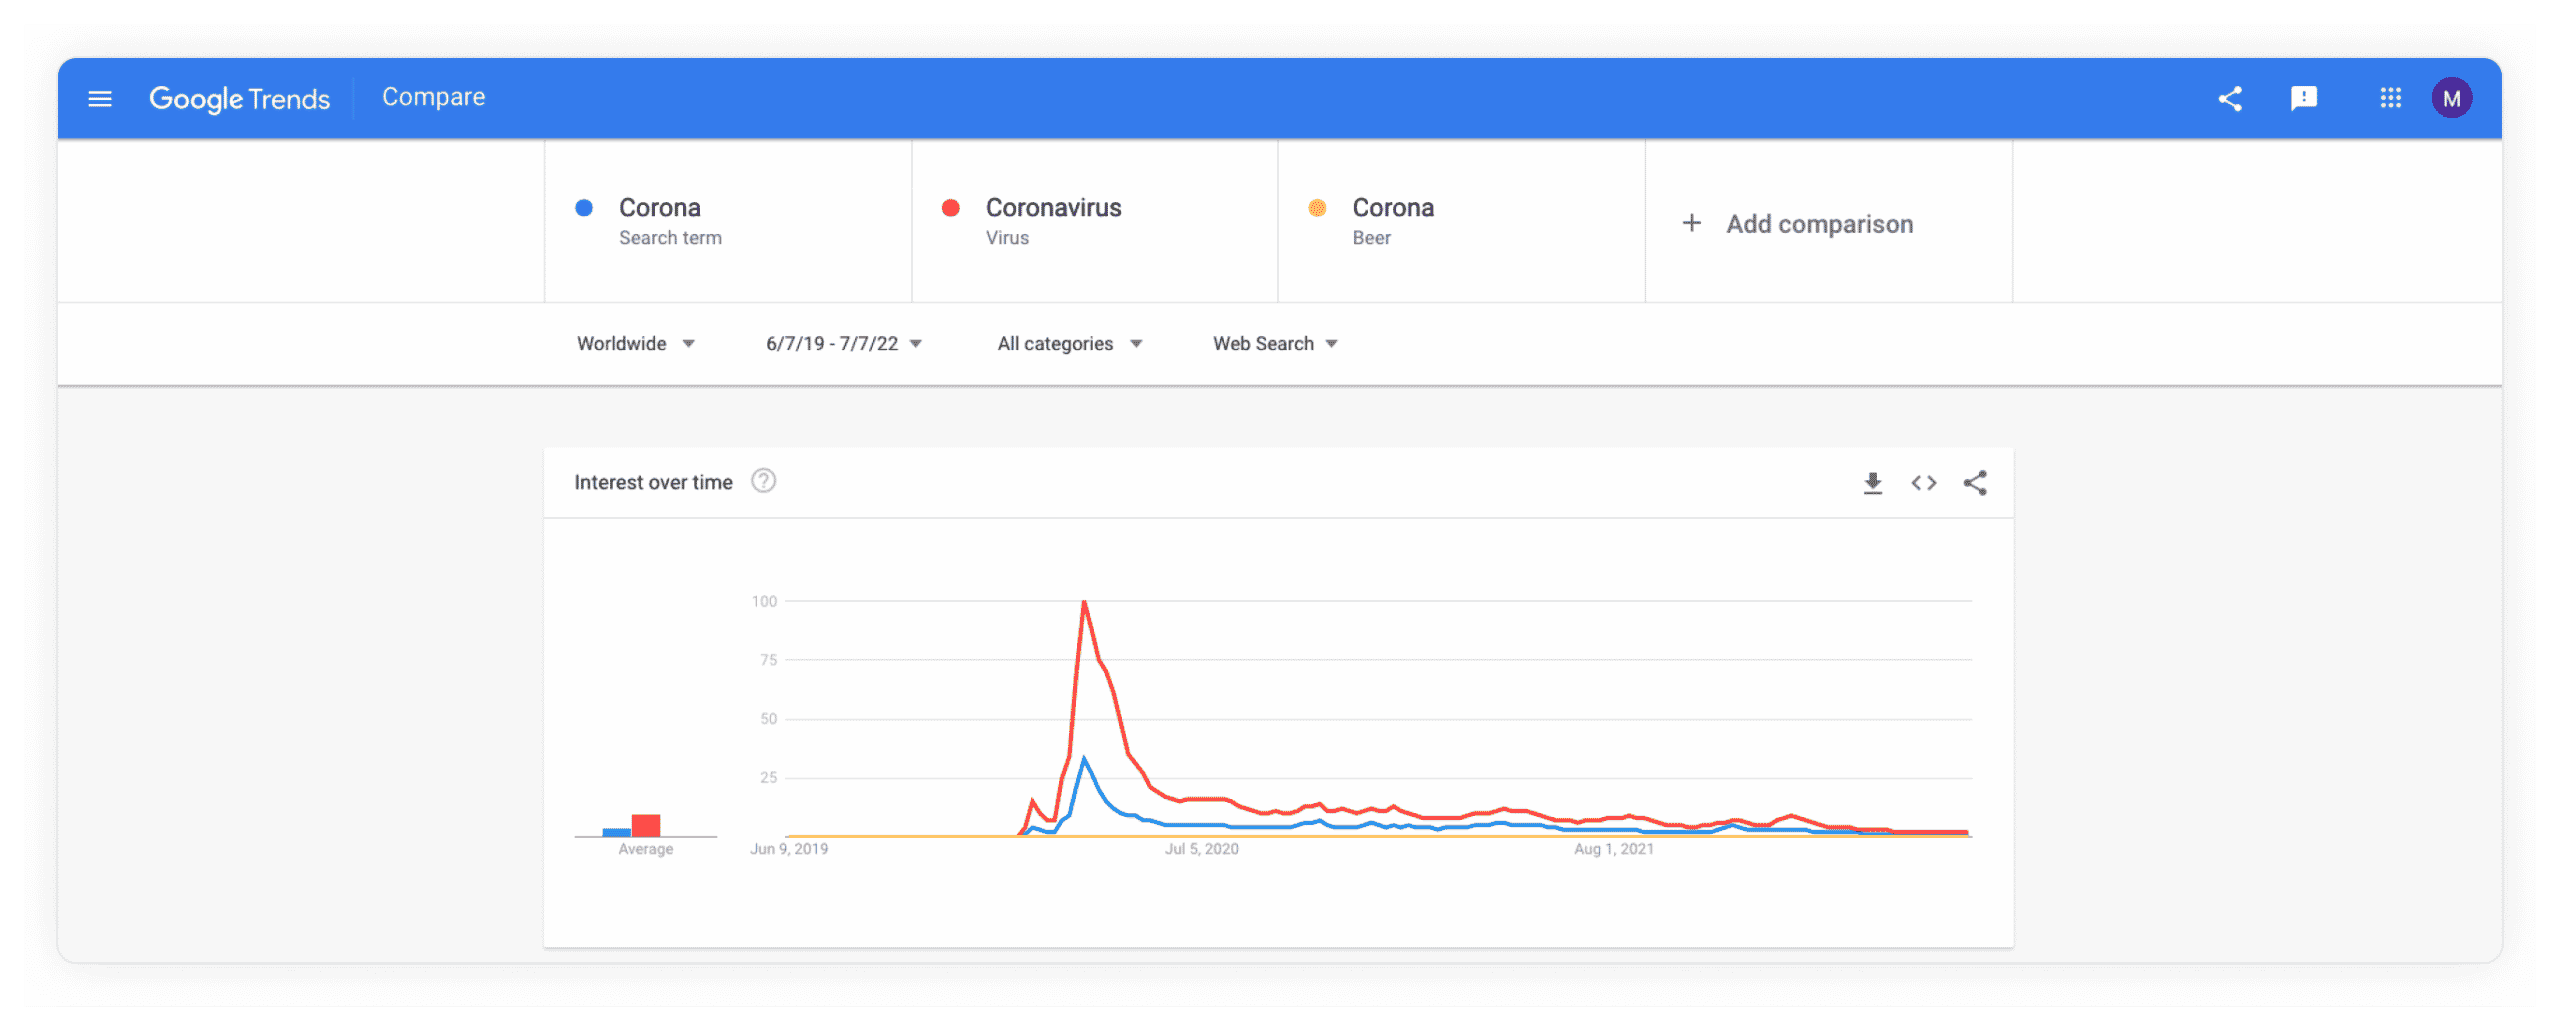 Corona in search terms and topics / Google Trends